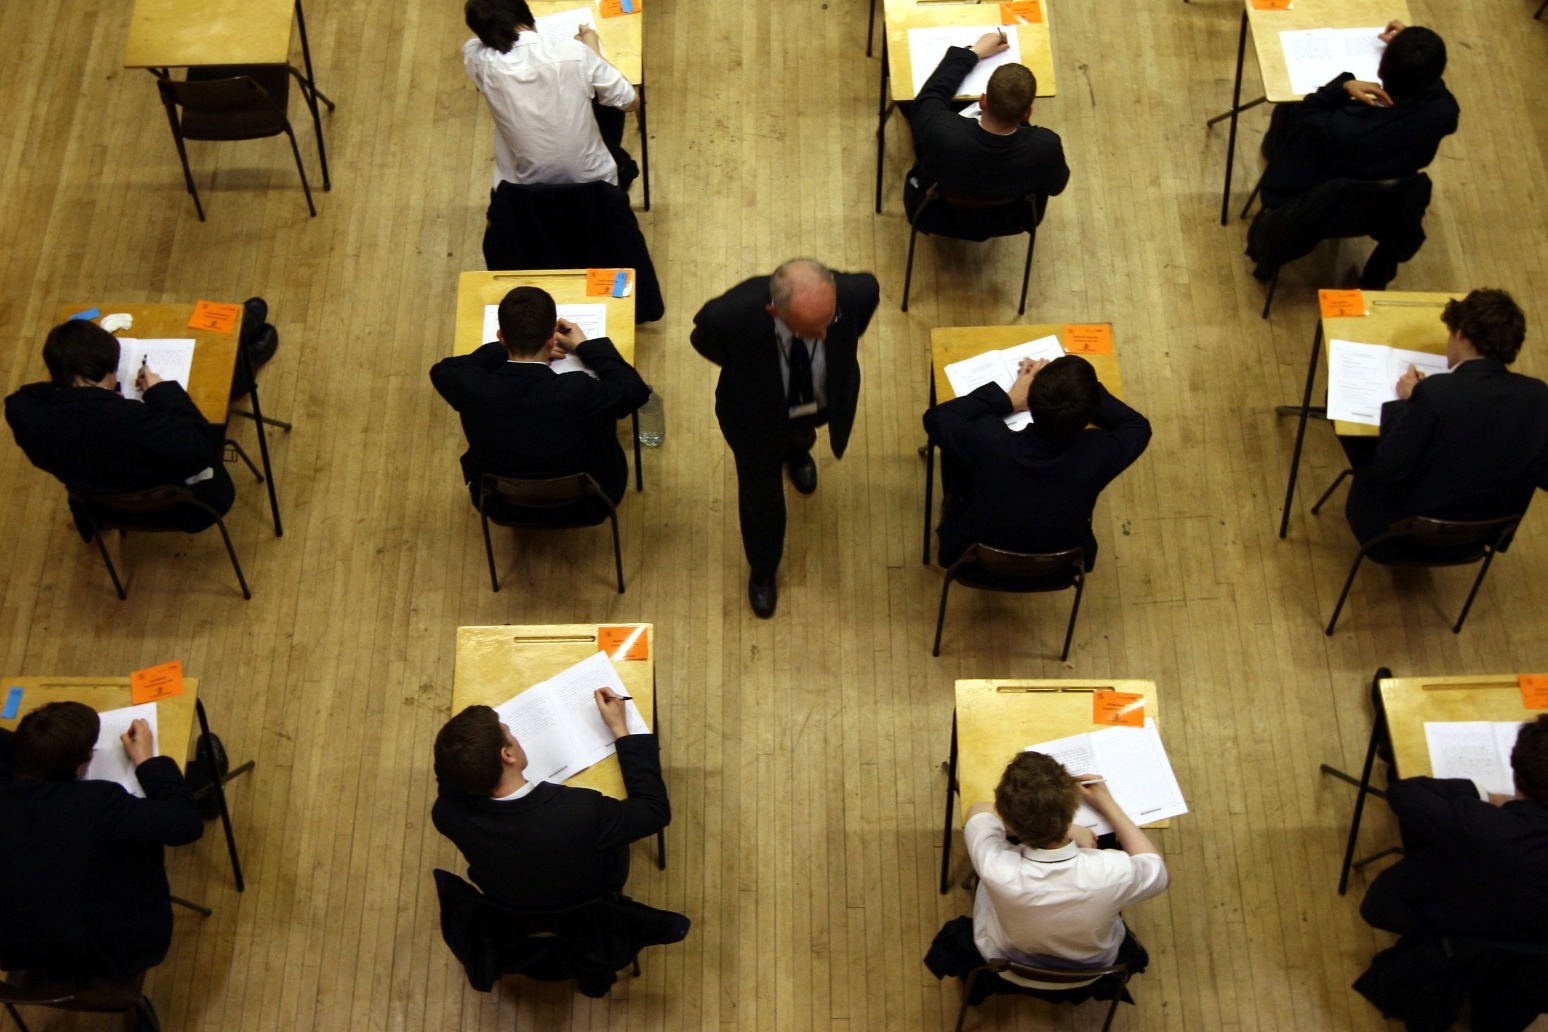 Big day for thousands of students as they get their GCSE results 